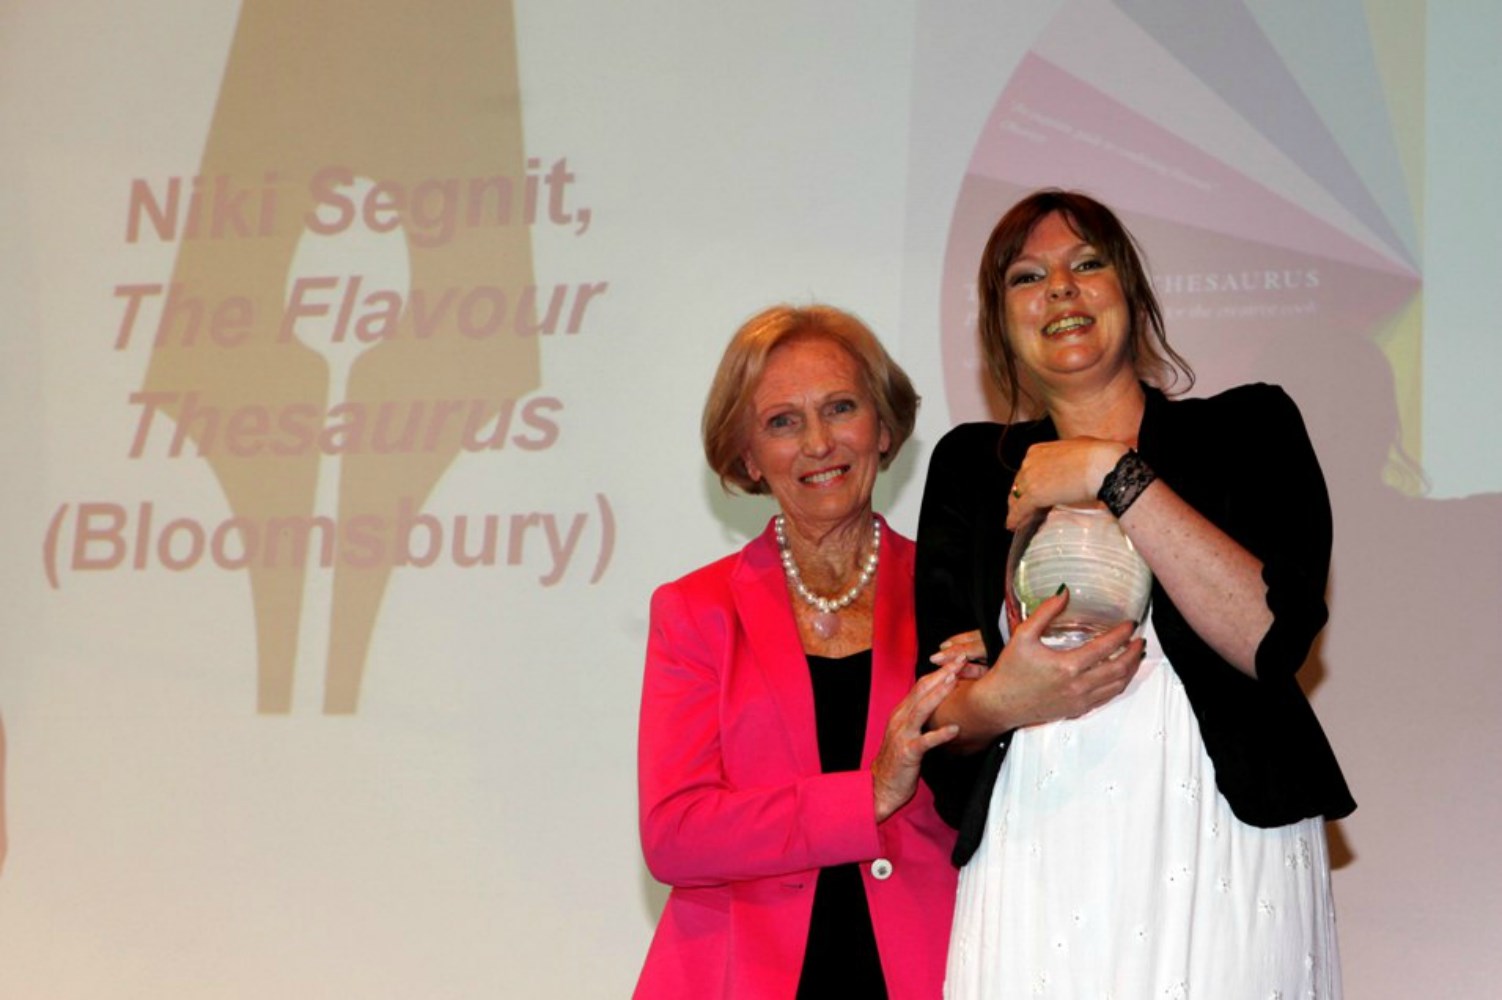 Niki Segnit (right) receiving her award from Mary Berry